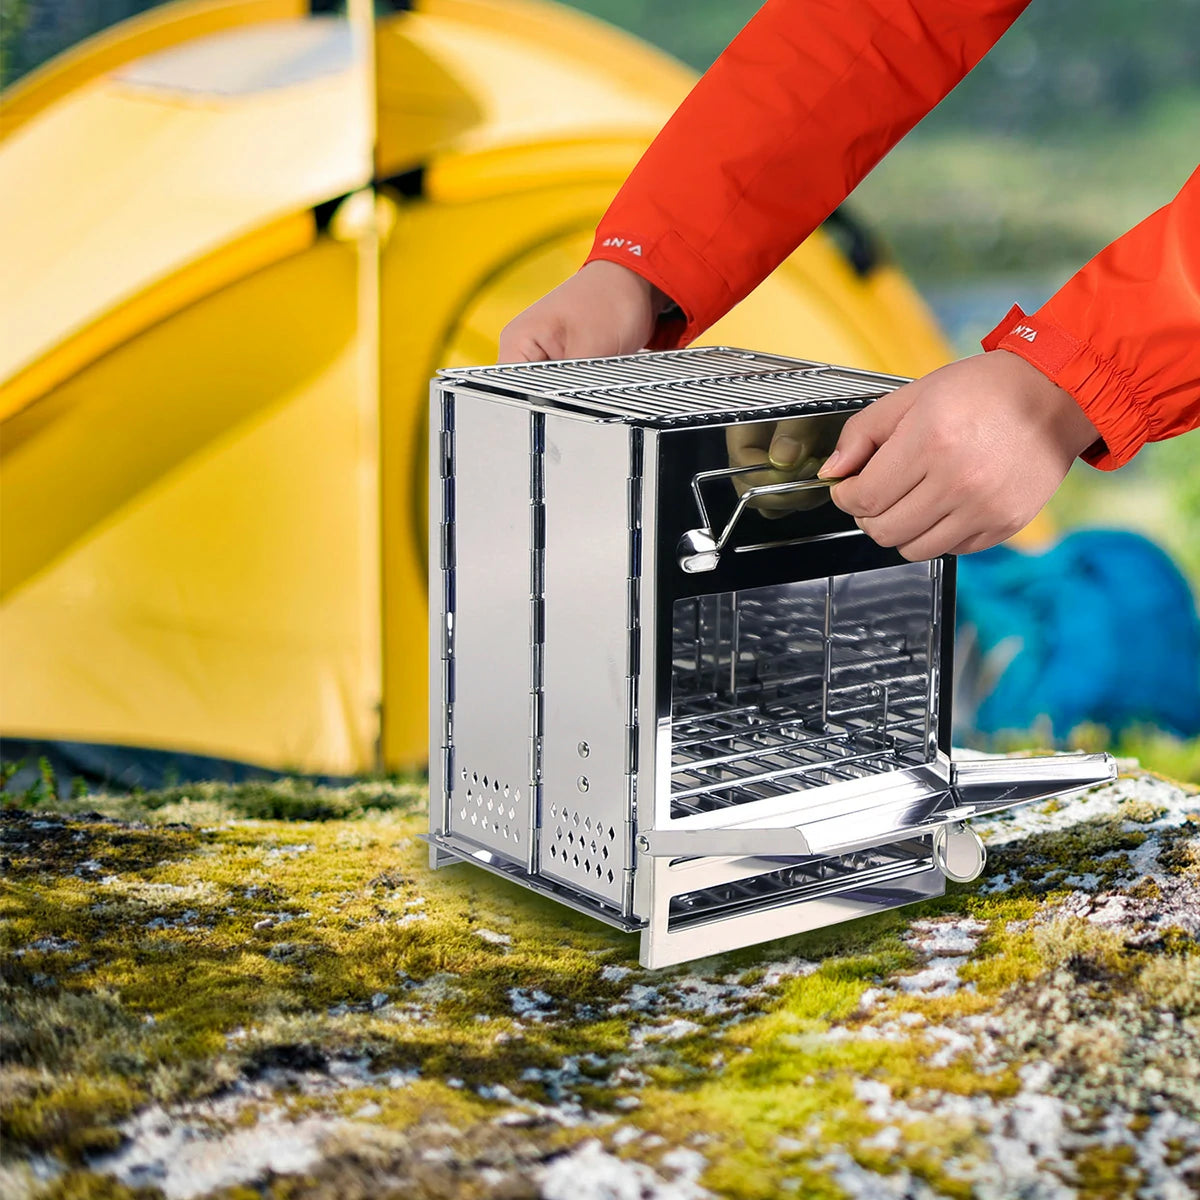 Wood Burning Camping Stove Folding with Pot Stand